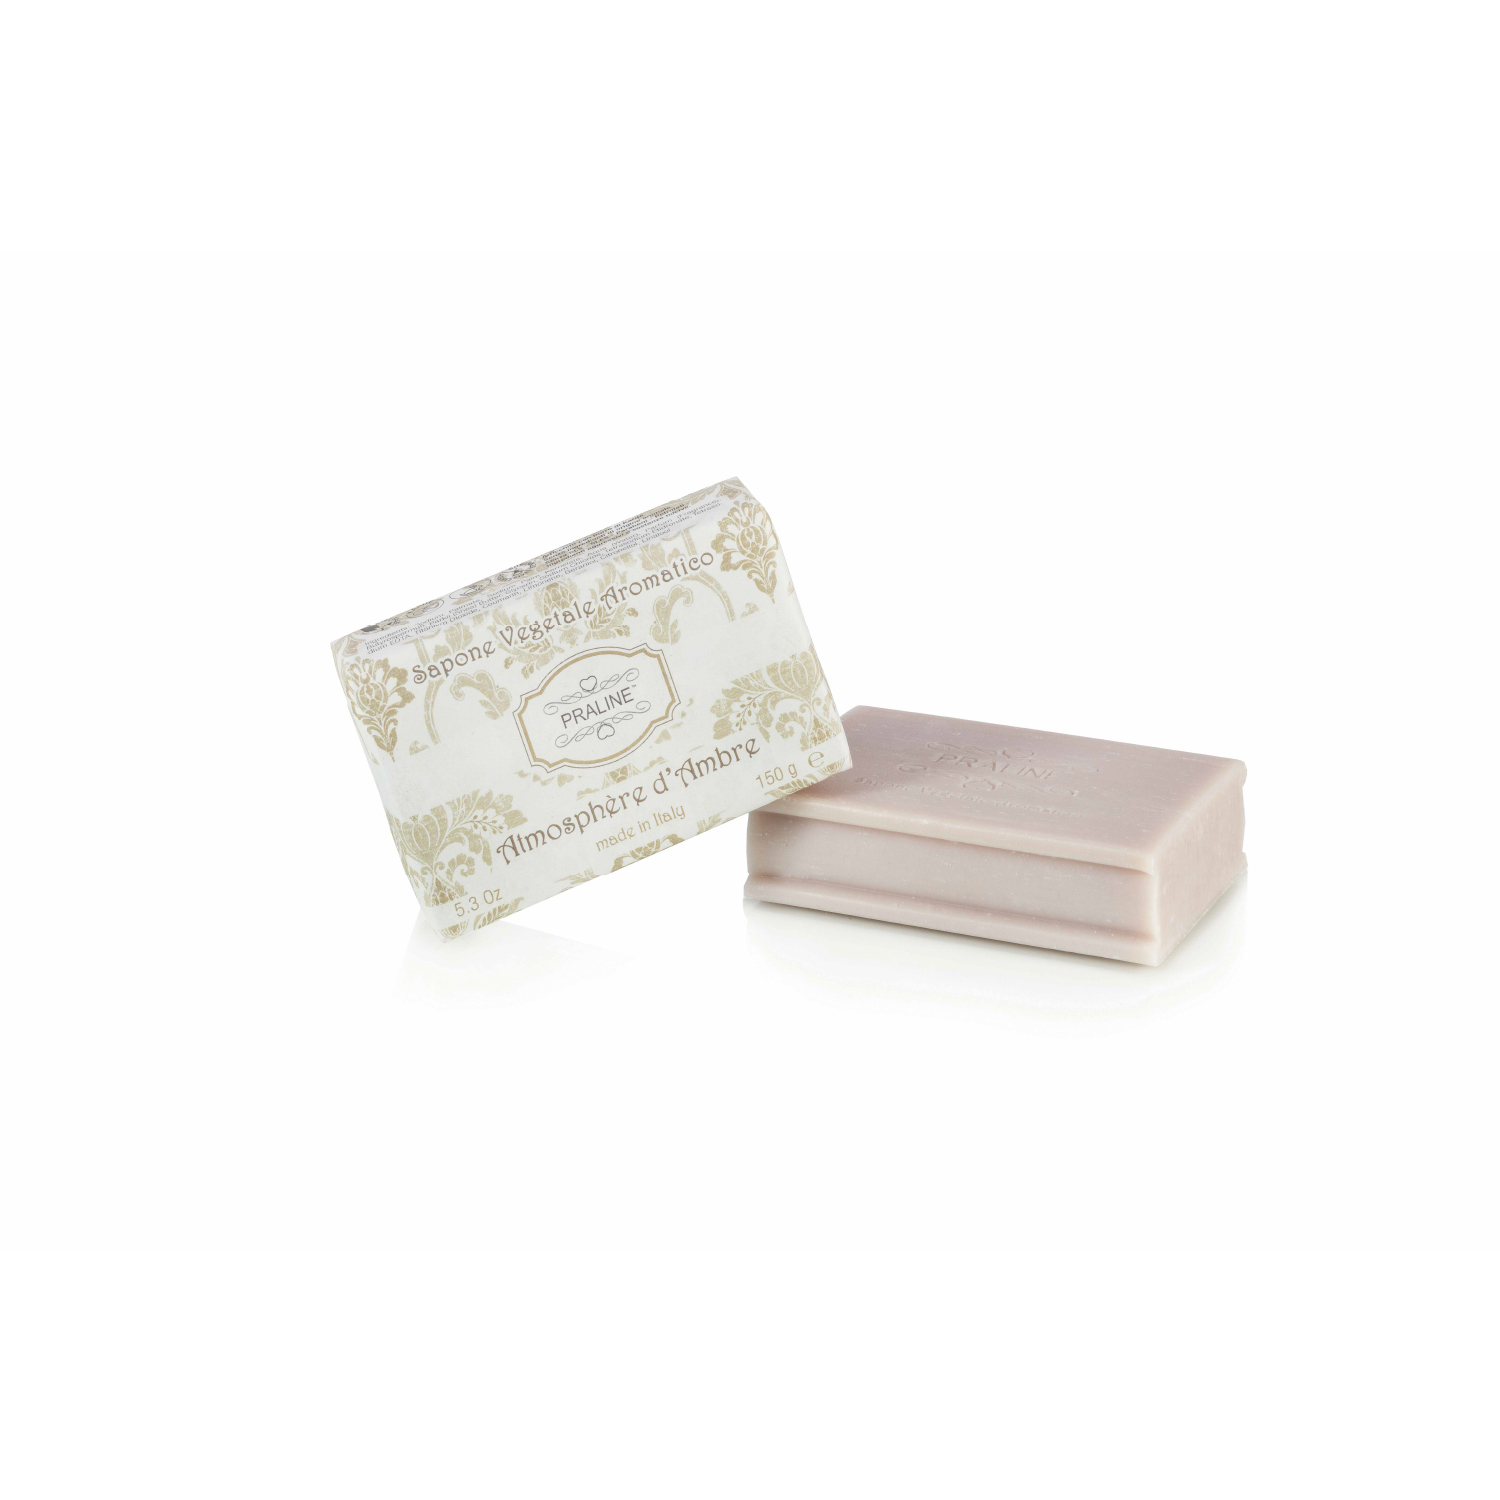 Vegetal Aromatic Soap – Solid Atmoshere d'Ambre